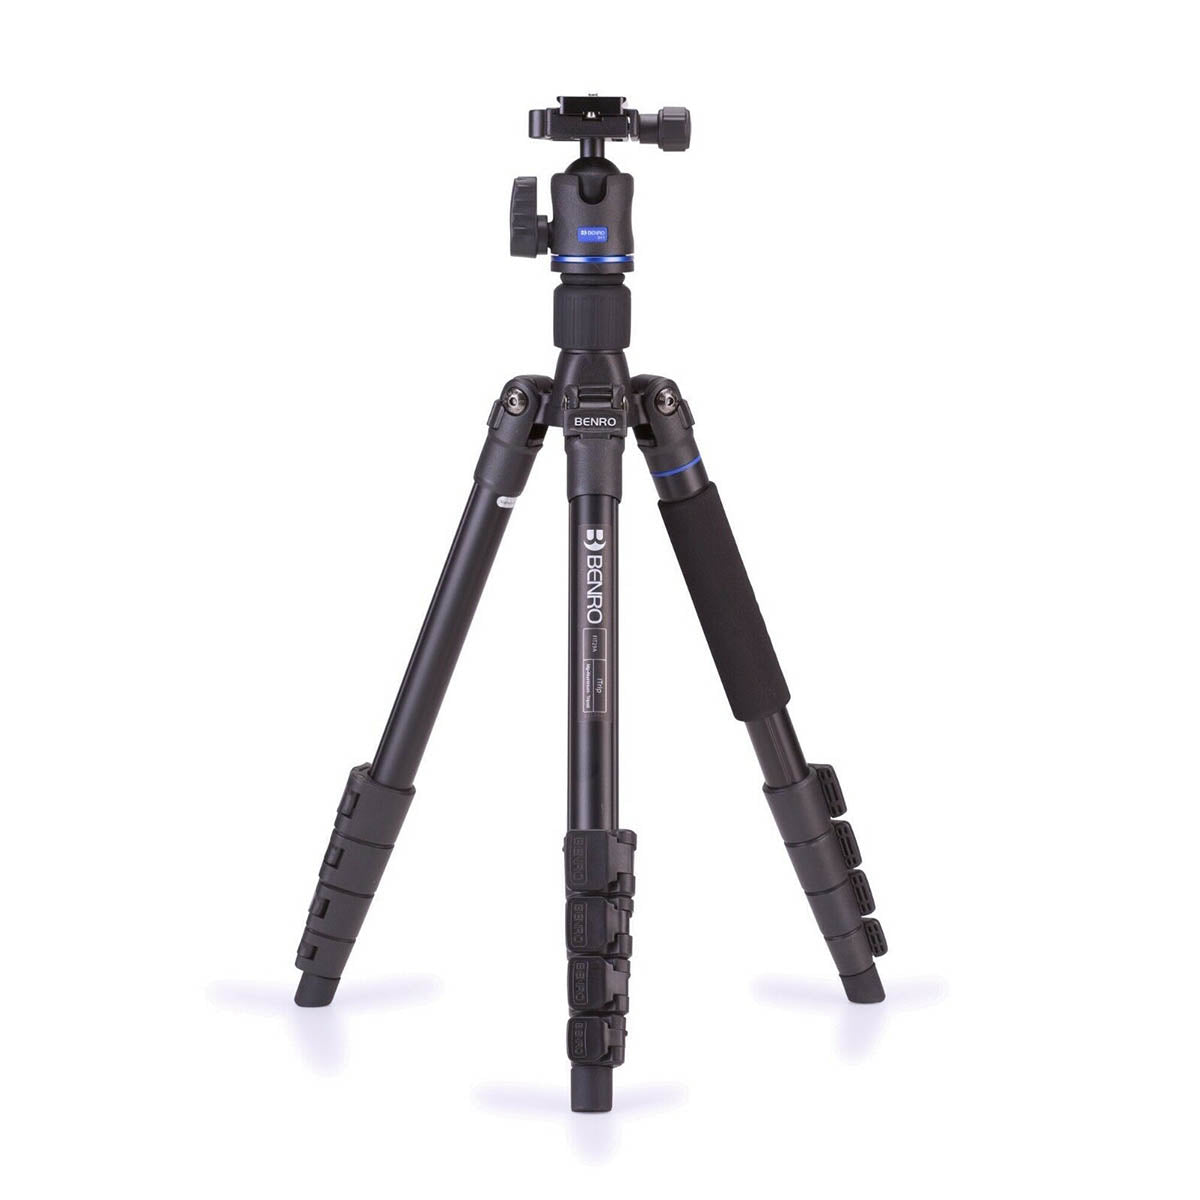 Benro Travel Tripod with monopod function